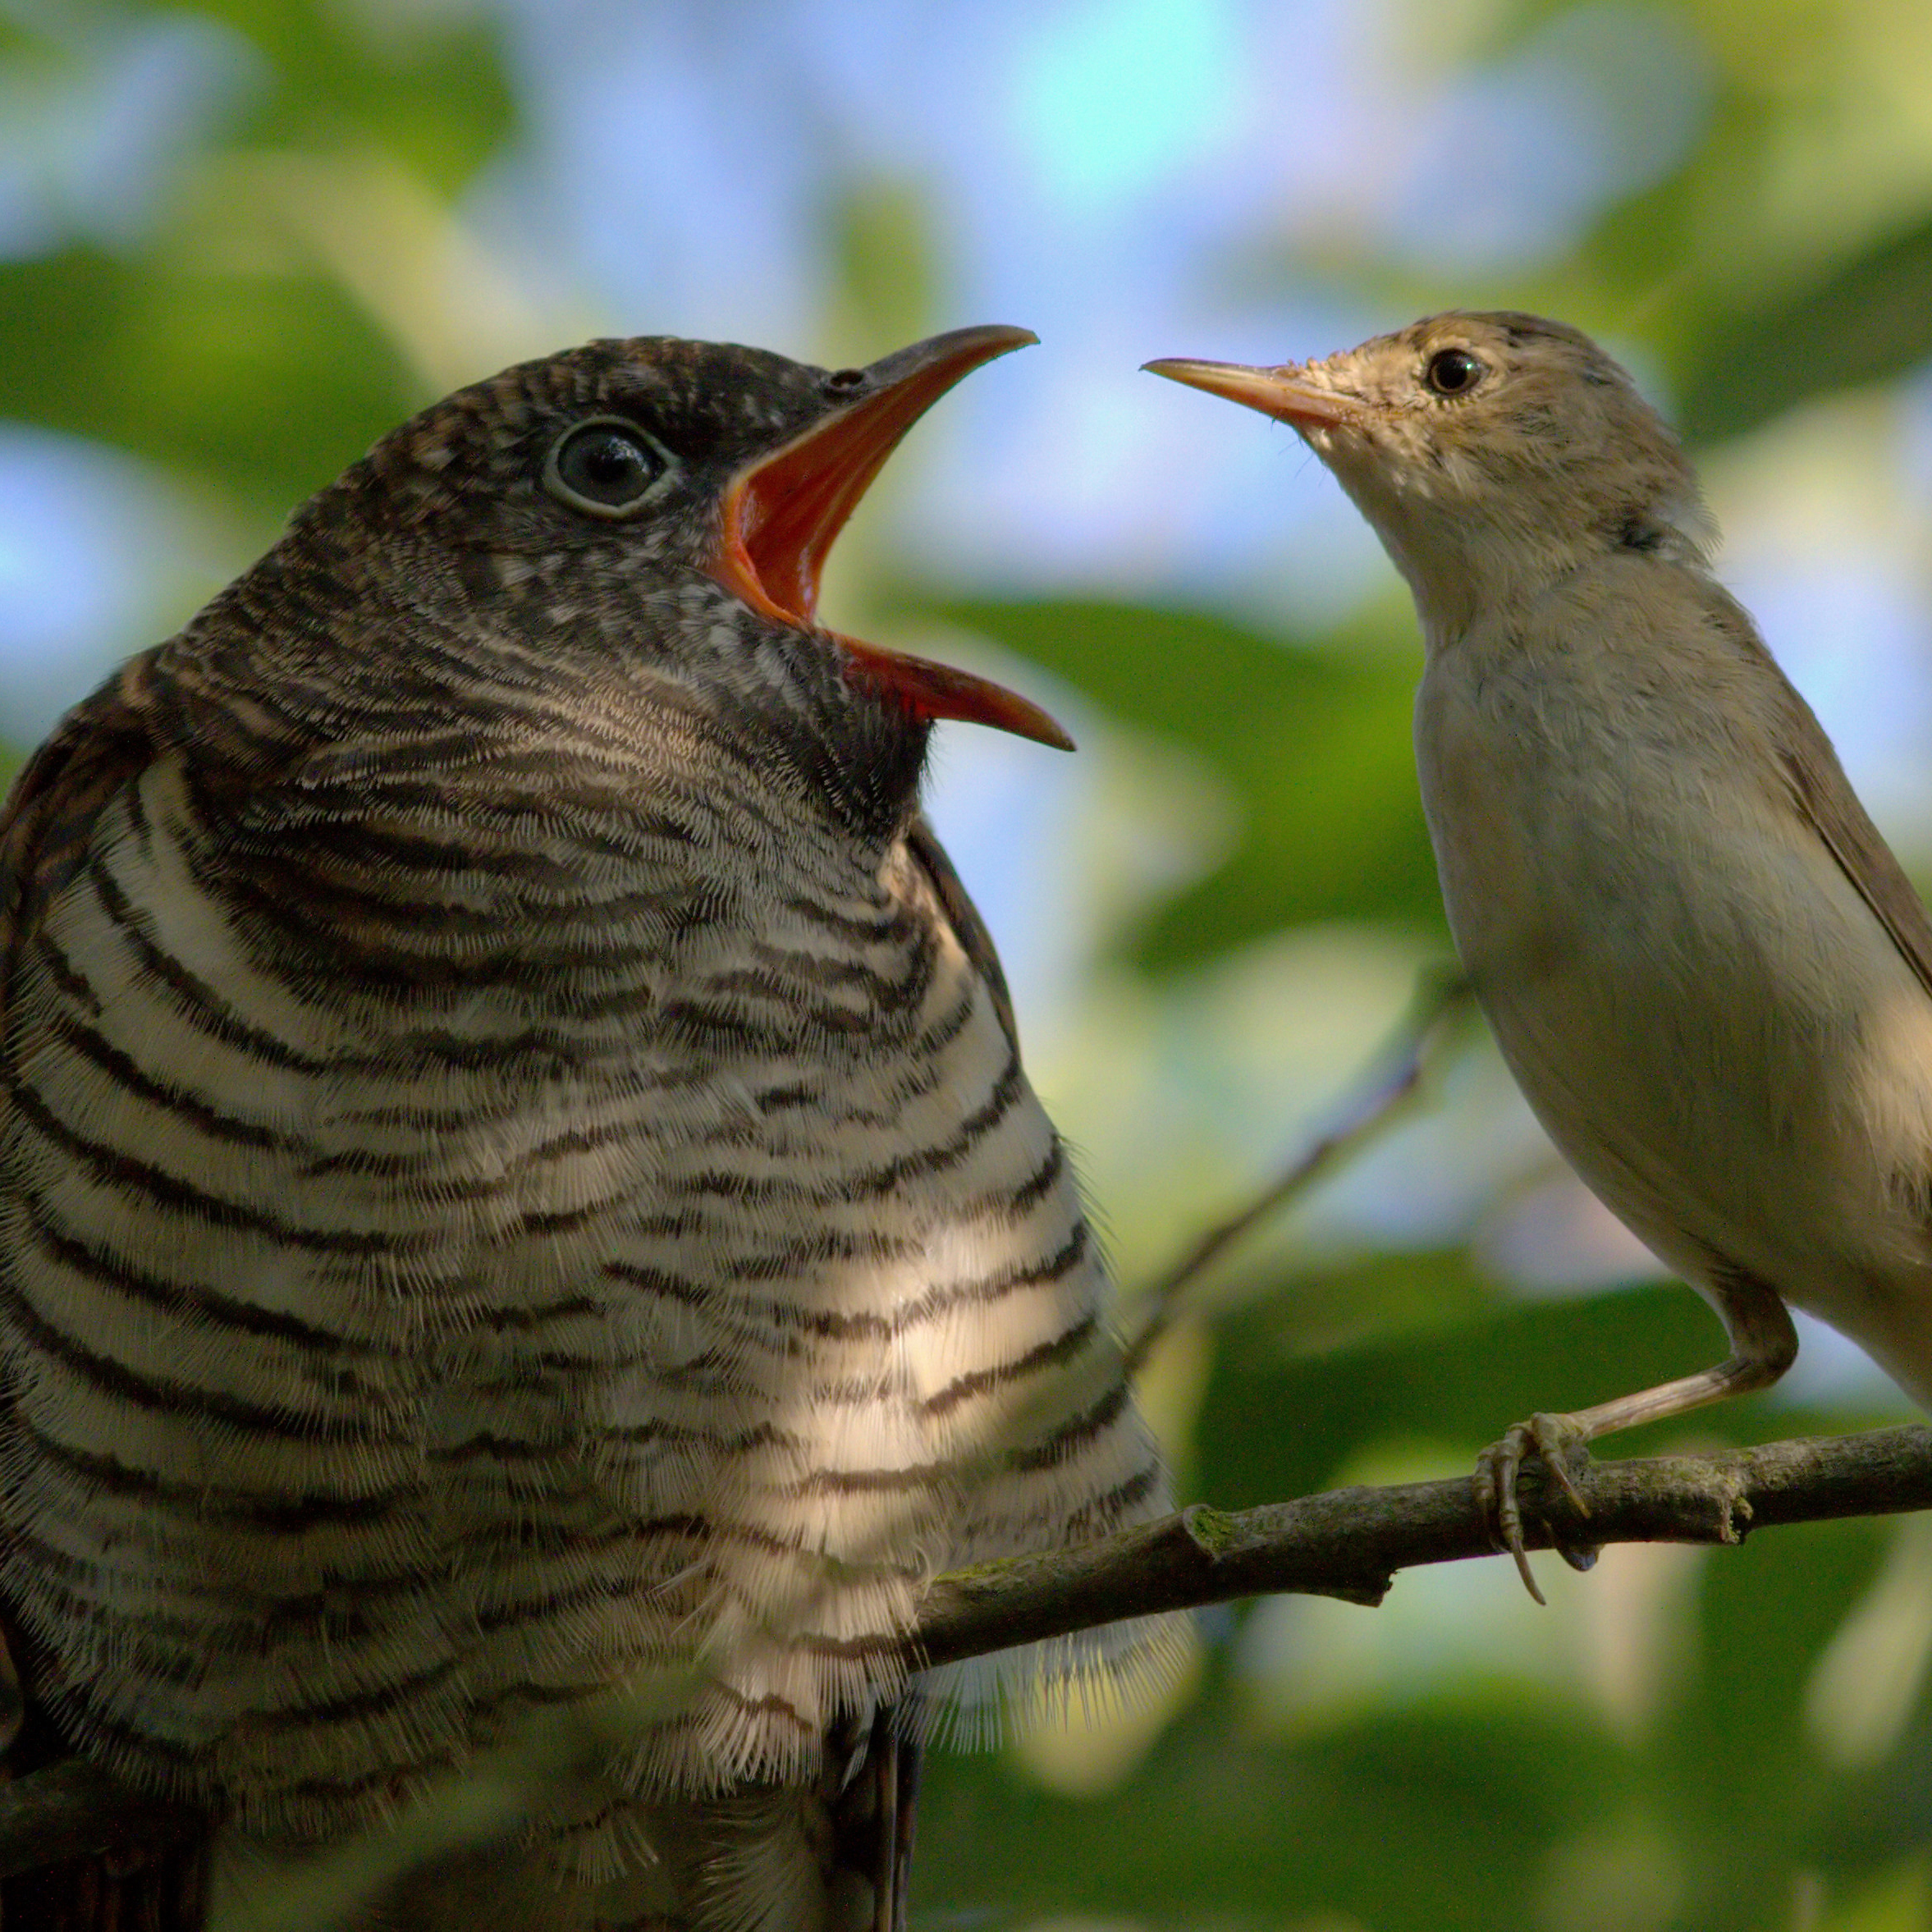 a young cuckoo being fed by its tiny foster parent